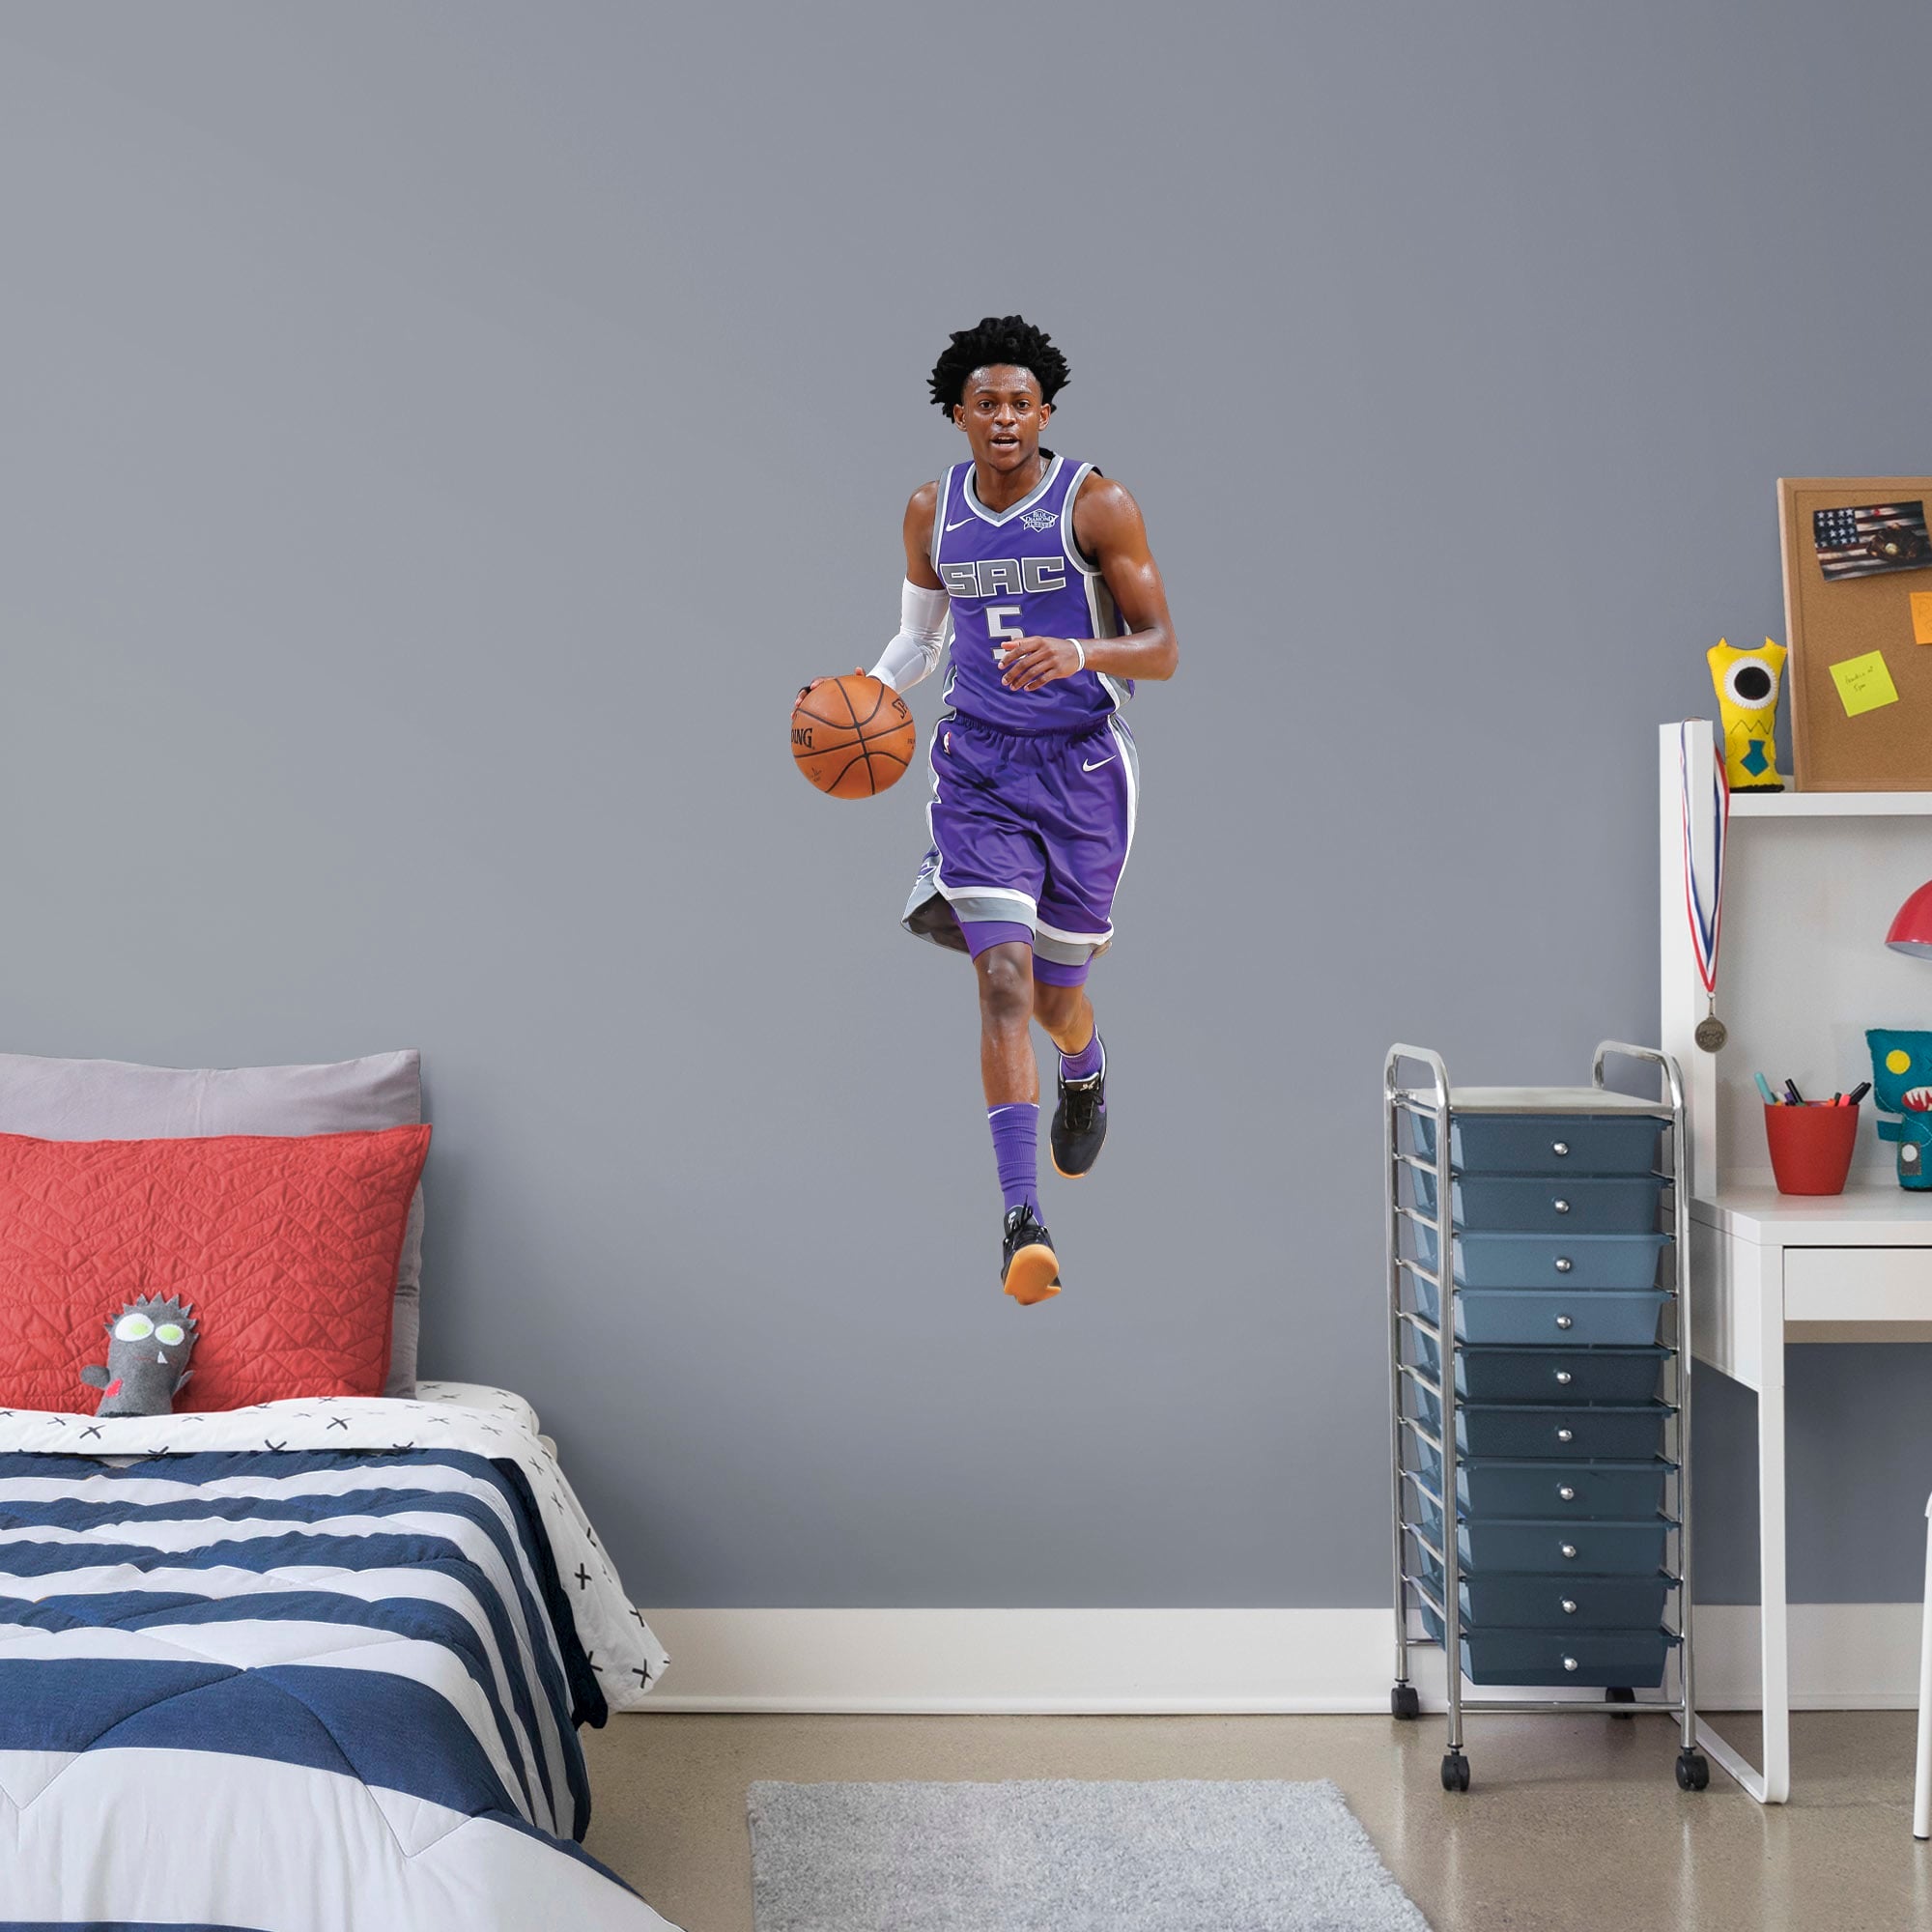 DeAaron Fox for Sacramento Kings - Officially Licensed NBA Removable Wall Decal Giant Athlete + 2 Decals (20"W x 52"H) by Fathe